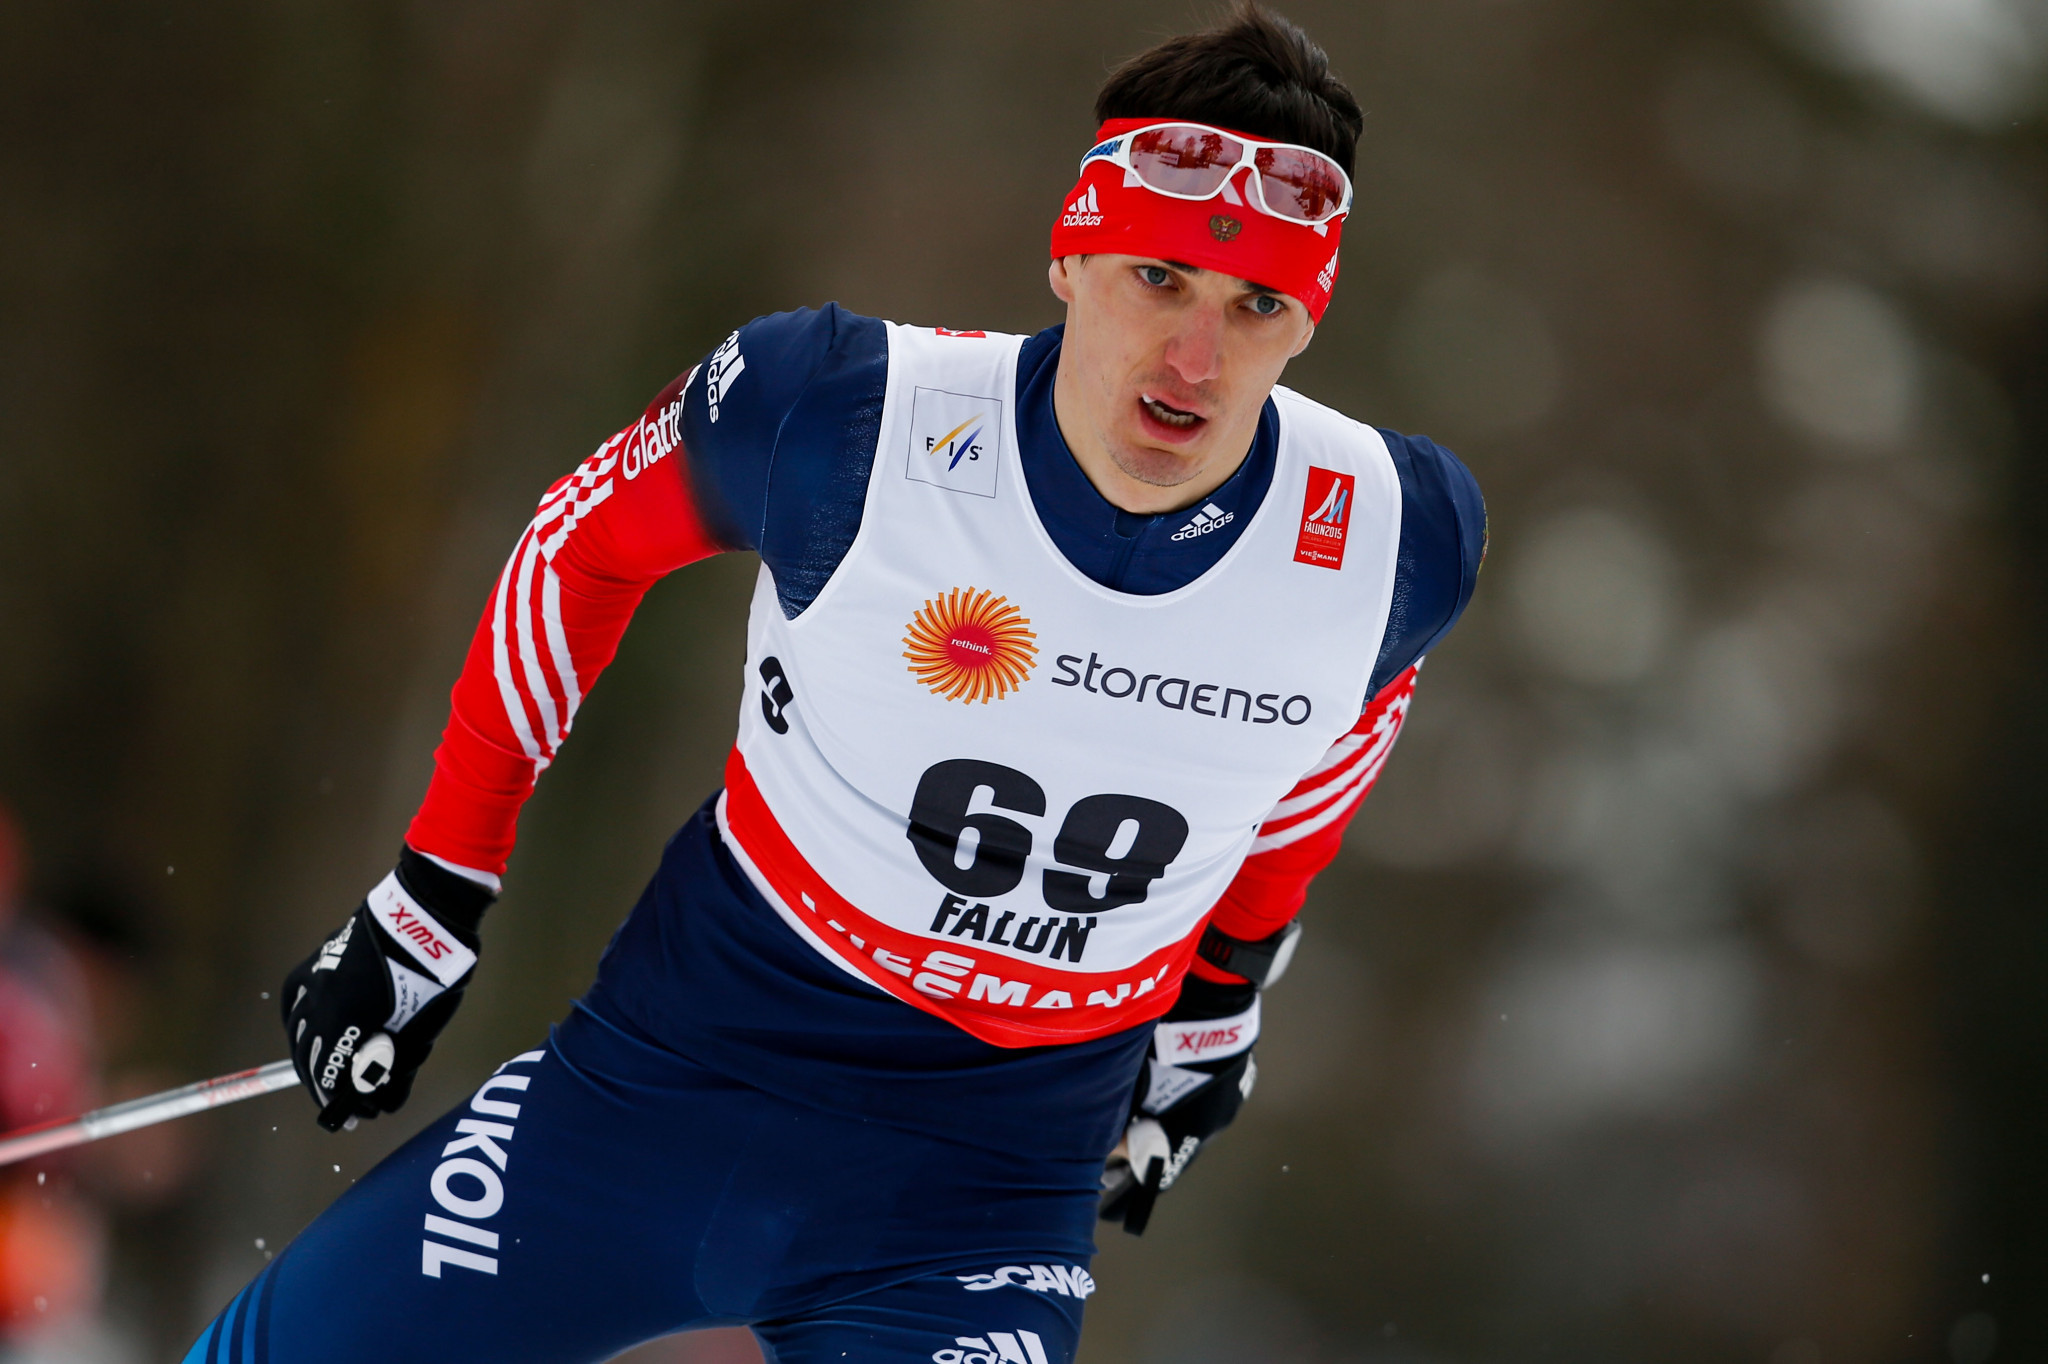 Evgeniy Belov, one of several cross-country skiers implicated in the Russian doping scandal, helped Russia win the men's relay ©Getty Images